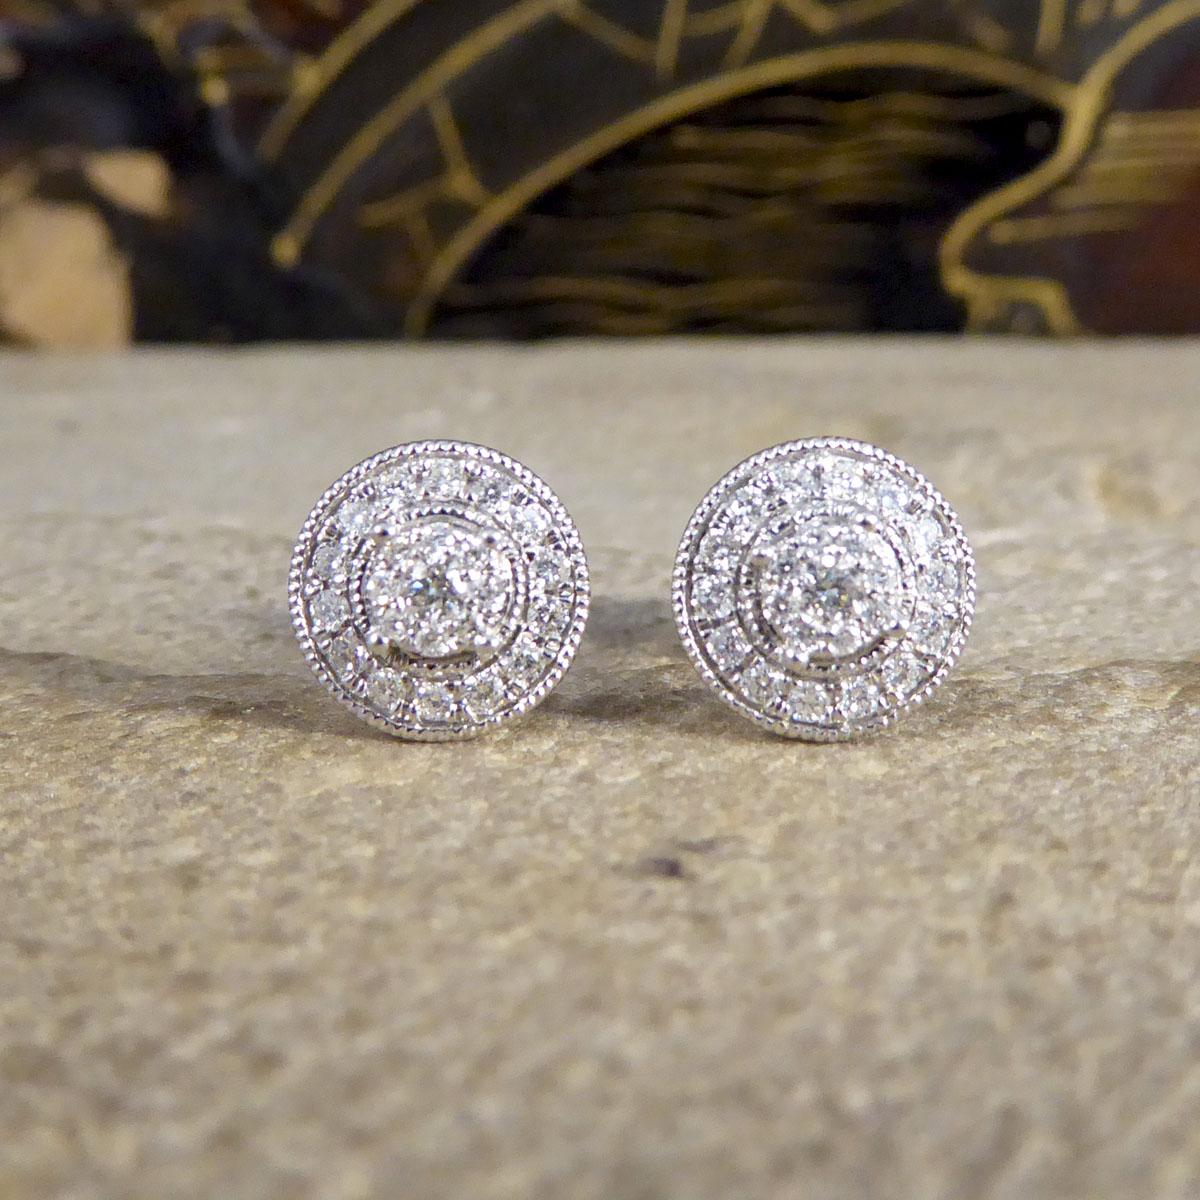 These beautiful contemporary earrings have been made with so much detail in an Art Deco style. Using such a lovely design, the Diamonds have been set in a cluster form with a Diamond halo surround in a milgrain setting with a total of 28pt in 46